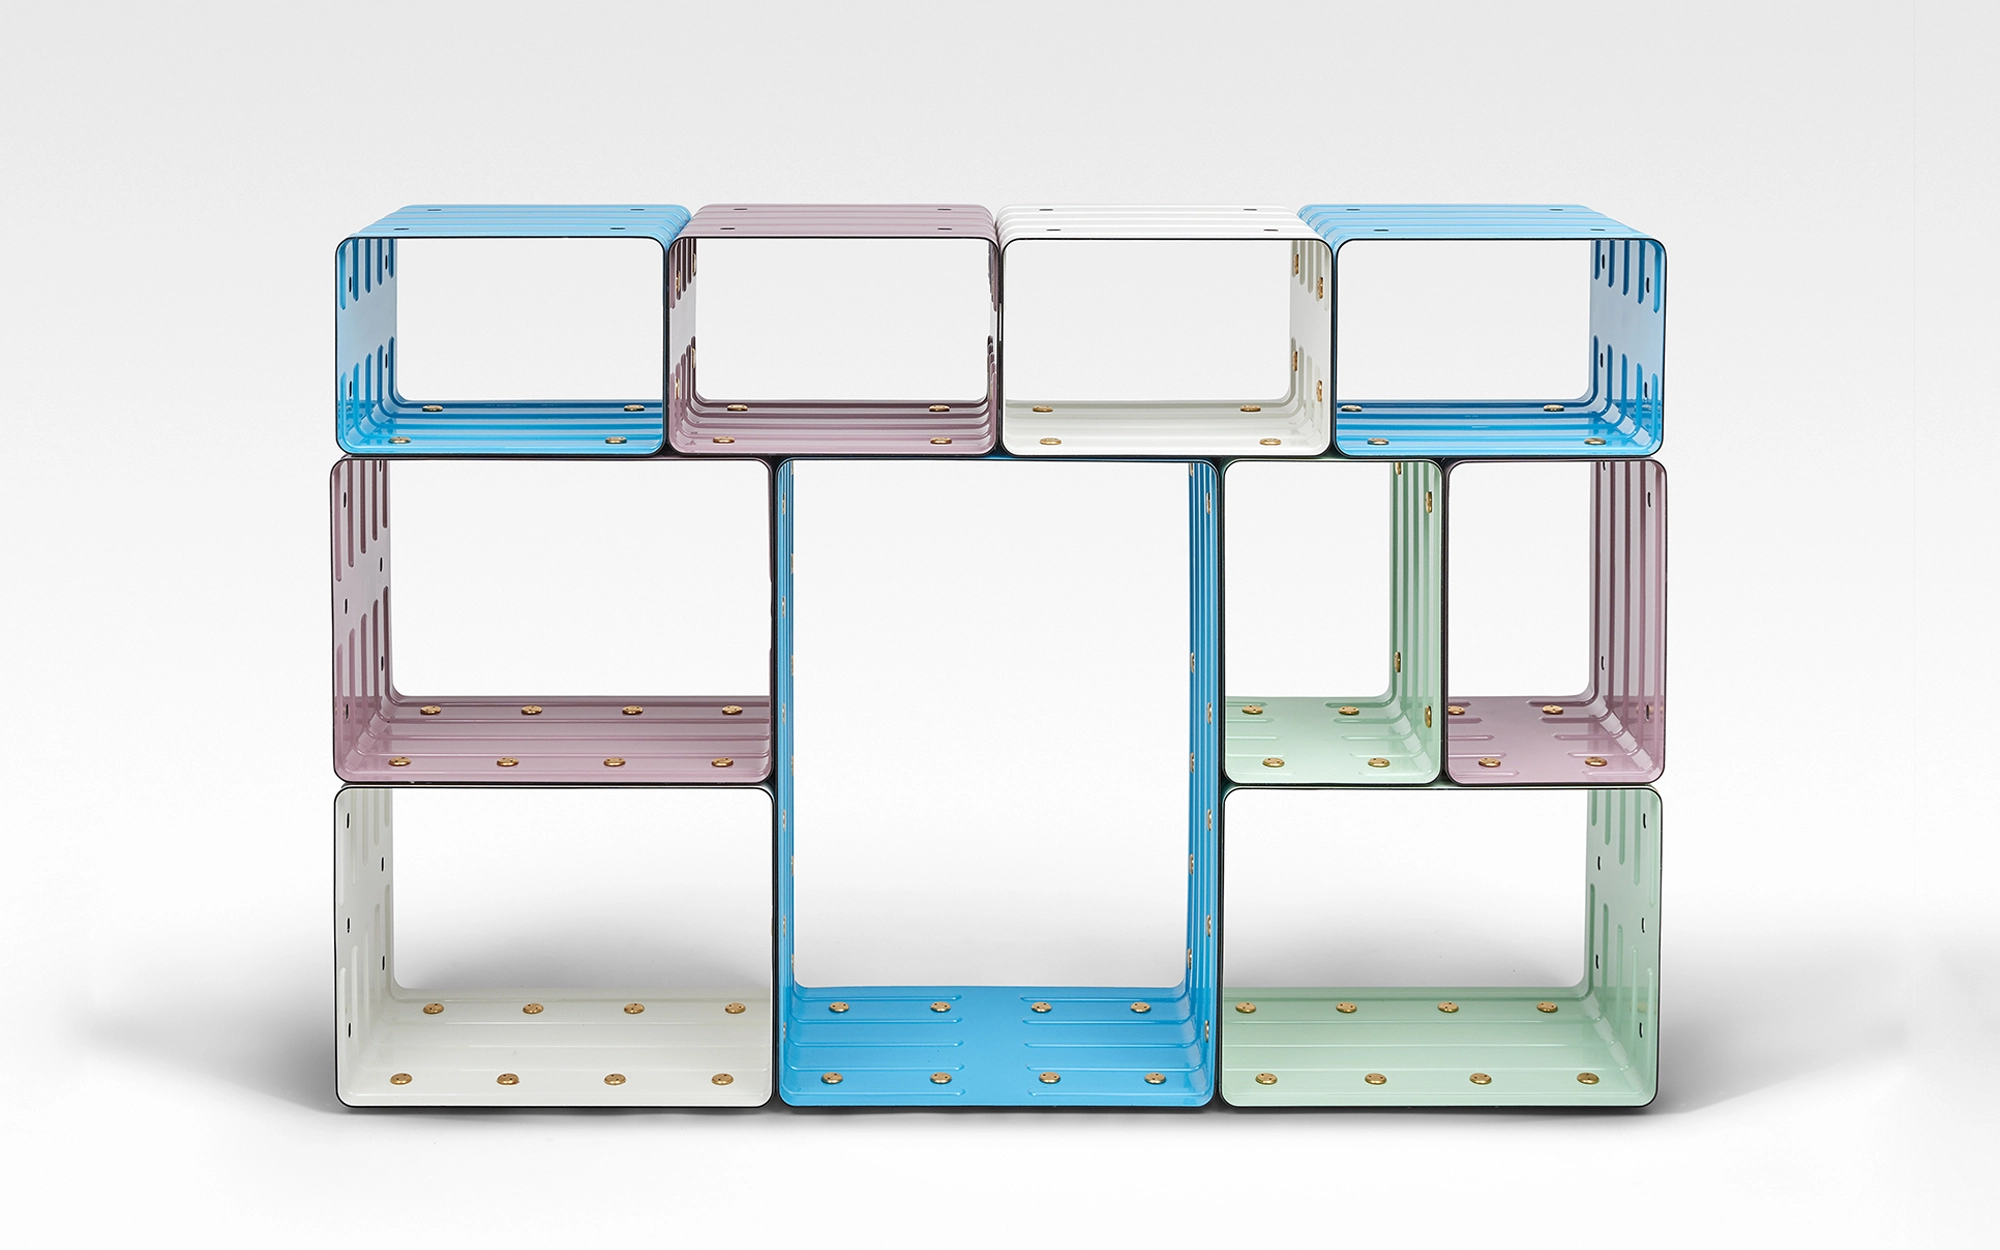 Quobus 1,3,6 multicolored - Marc Newson - Quobus by Marc Newson.